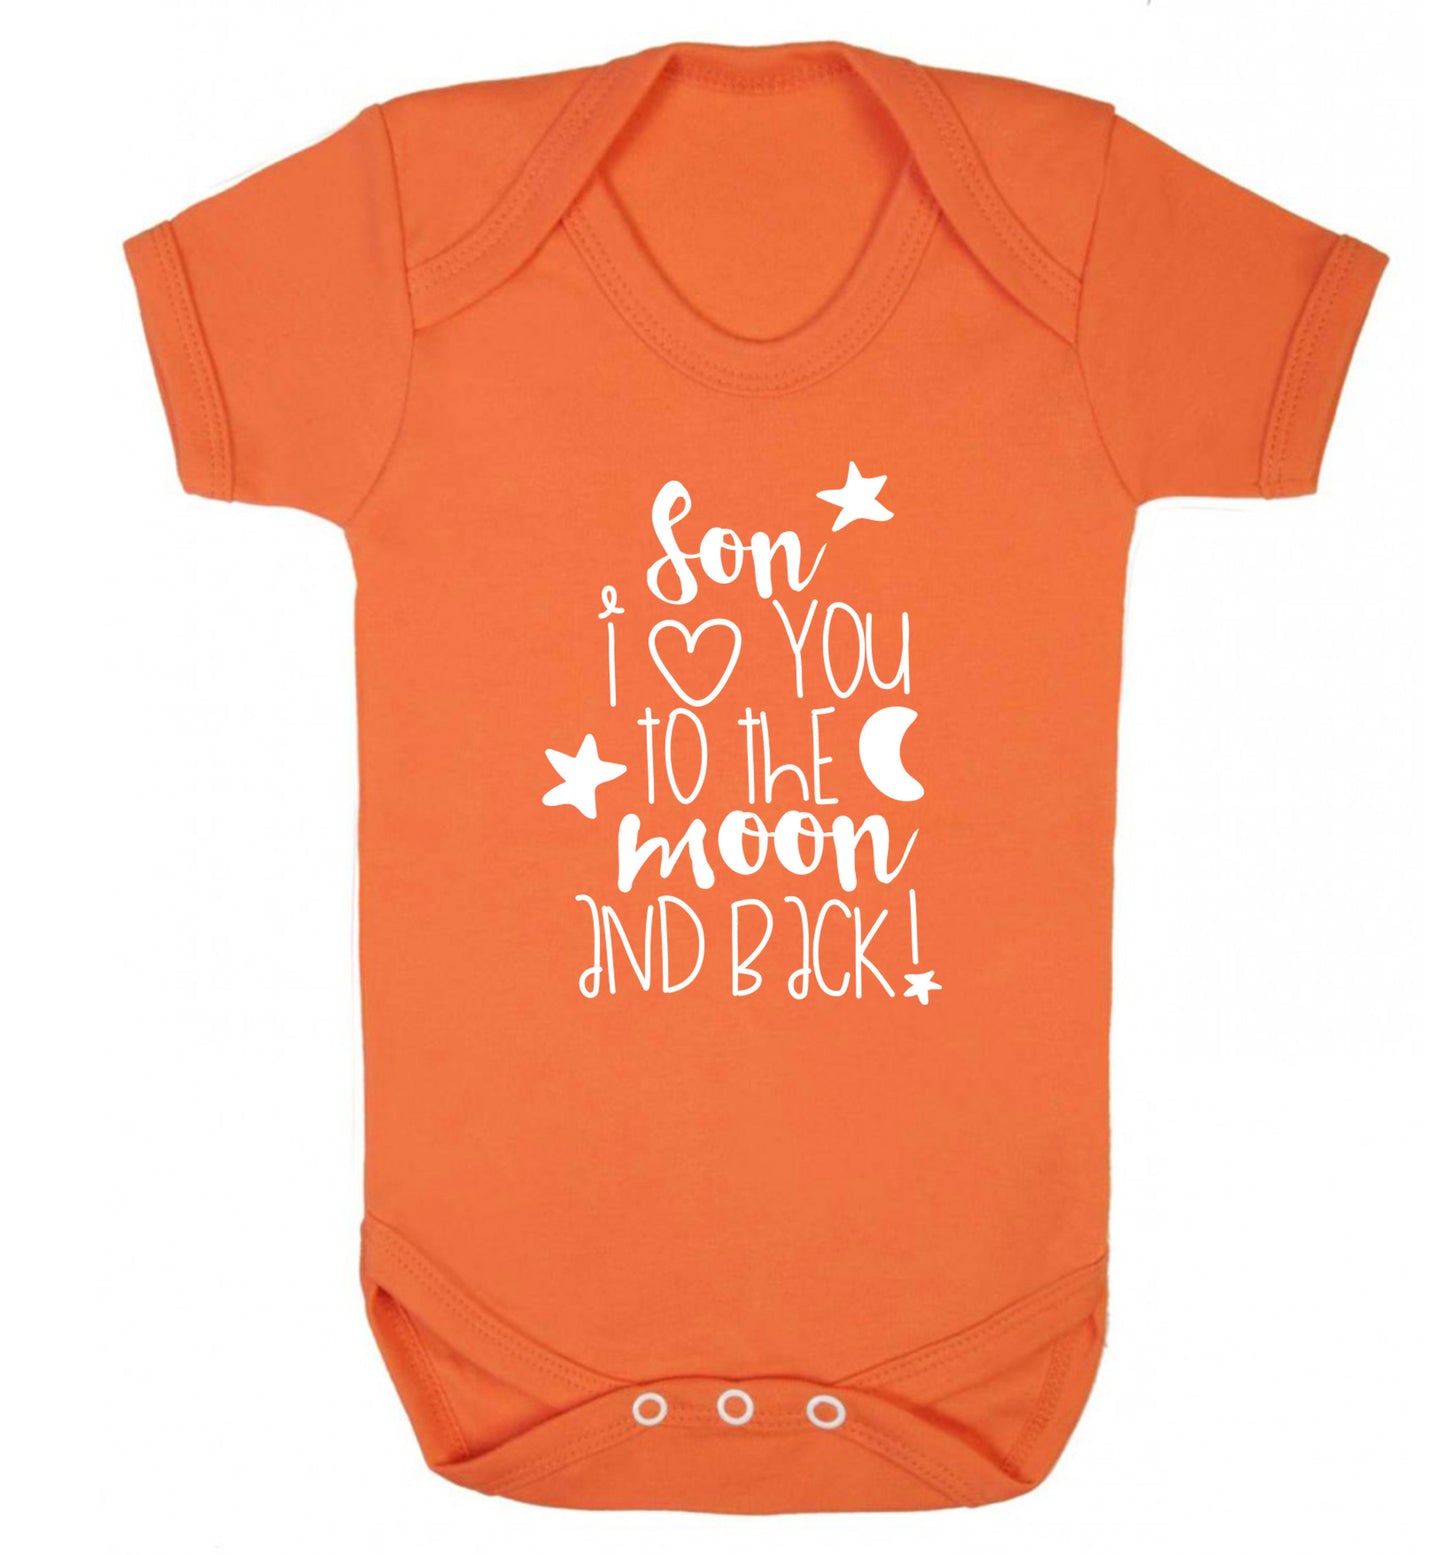 Son I love you to the moon and back Baby Vest orange 18-24 months